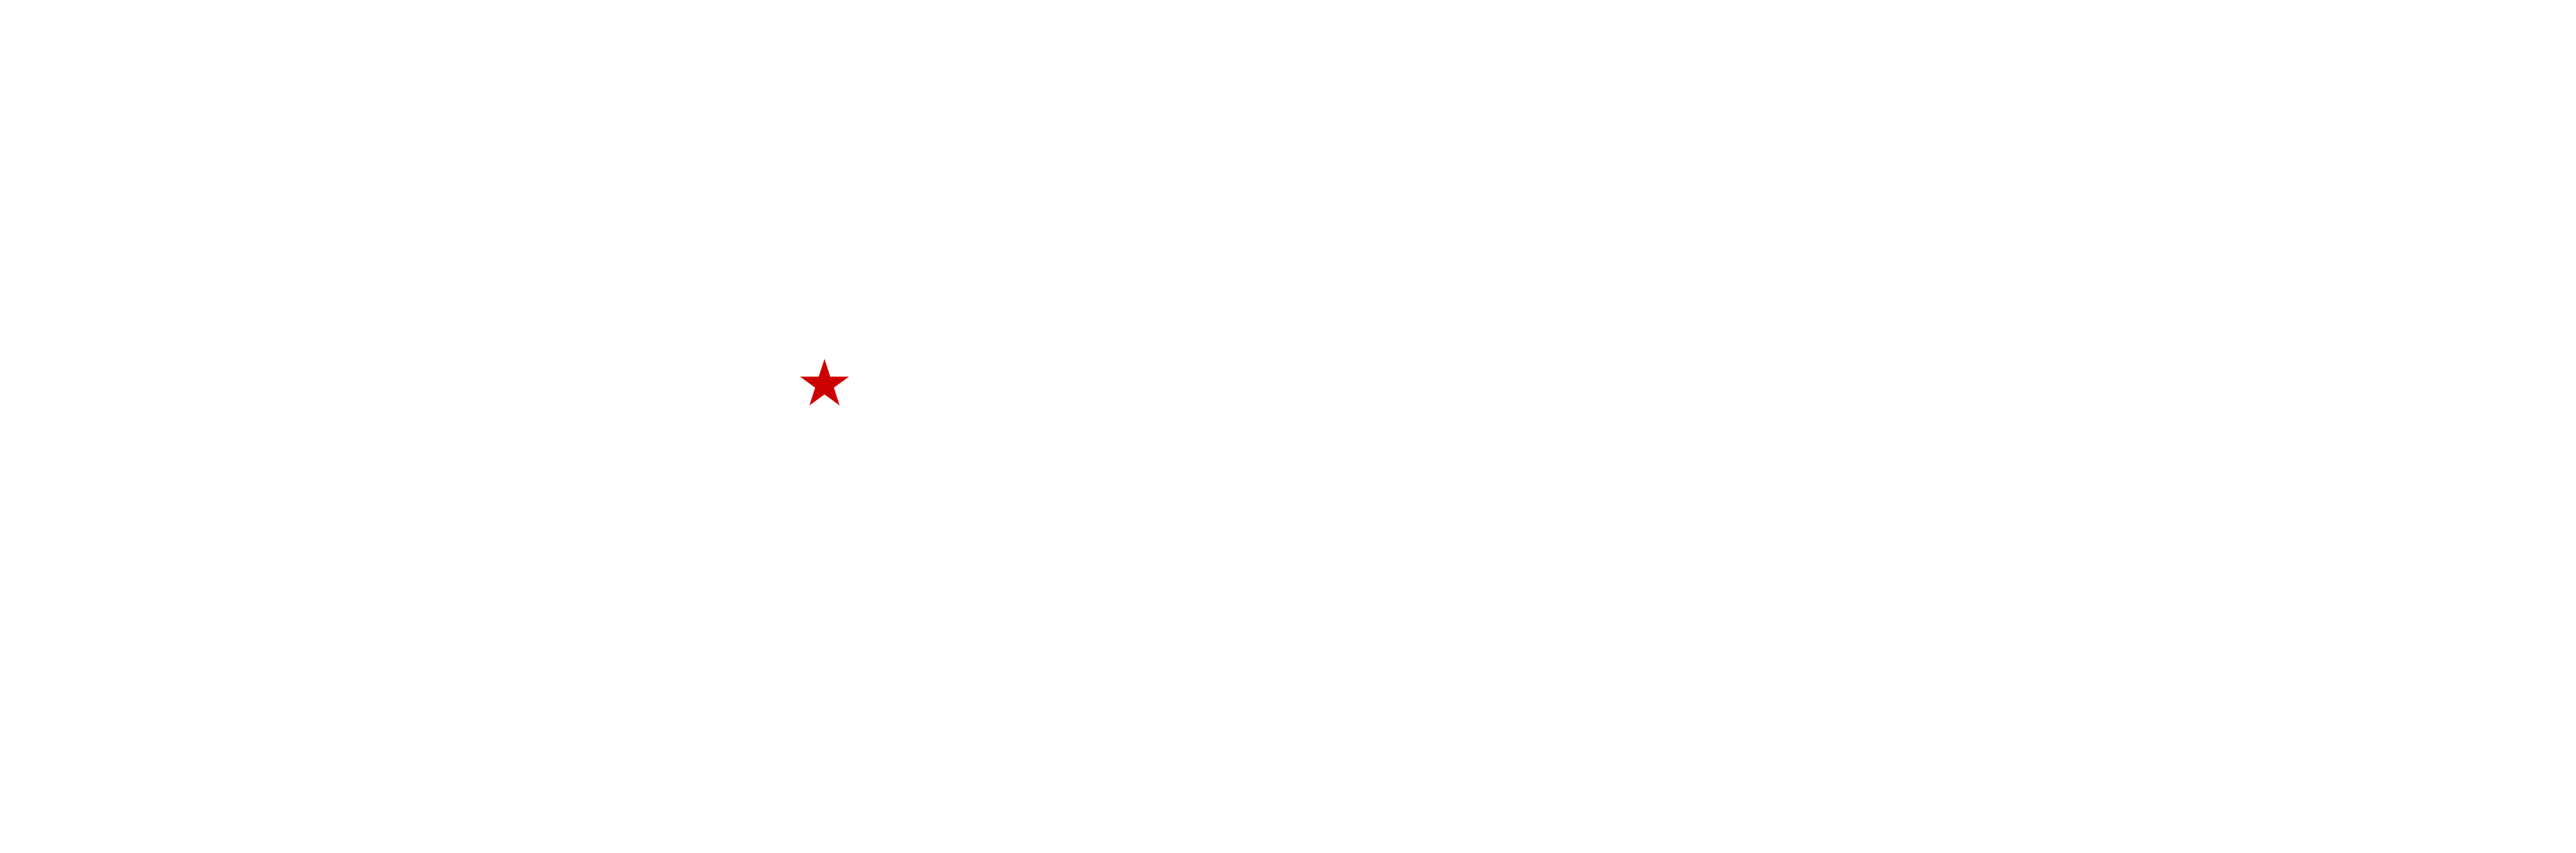 Gift Guide - Give the Gift of Warmth this Holiday Season